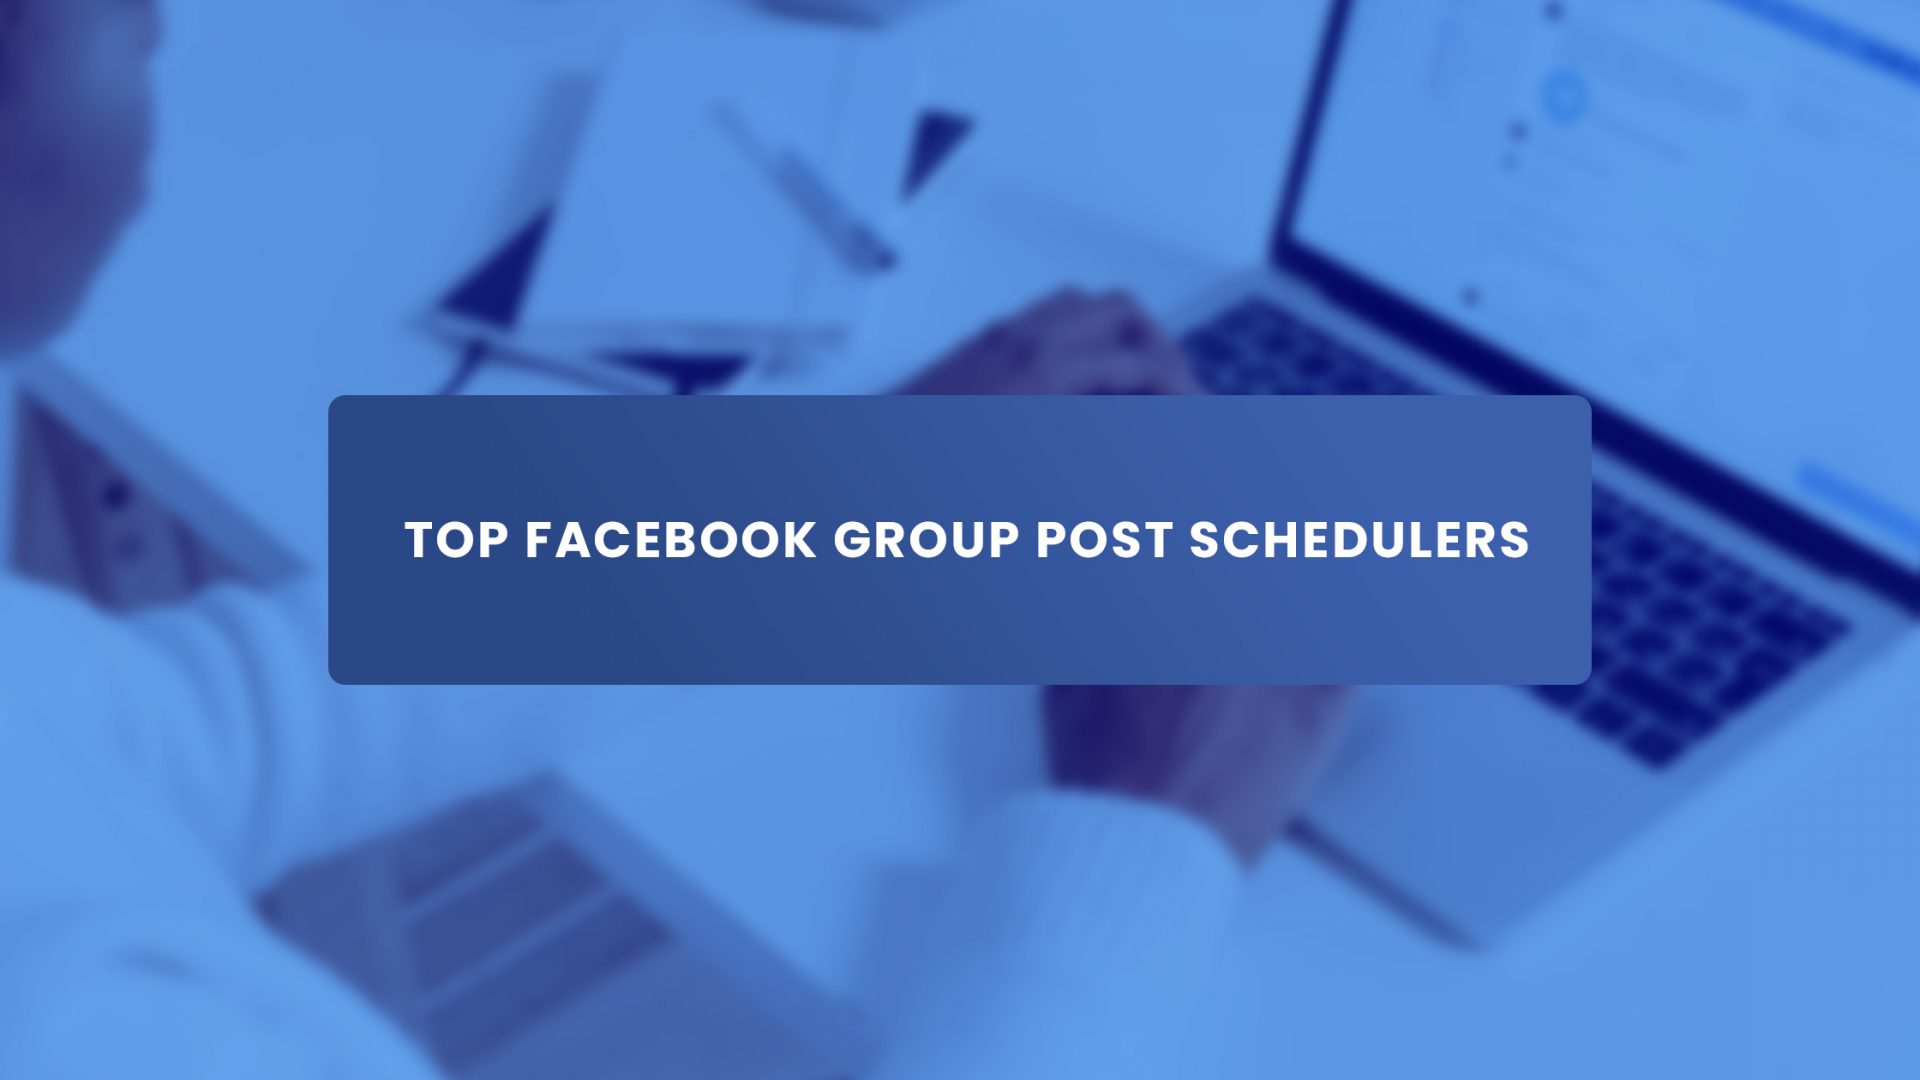 Facebook Group Post Schedulers